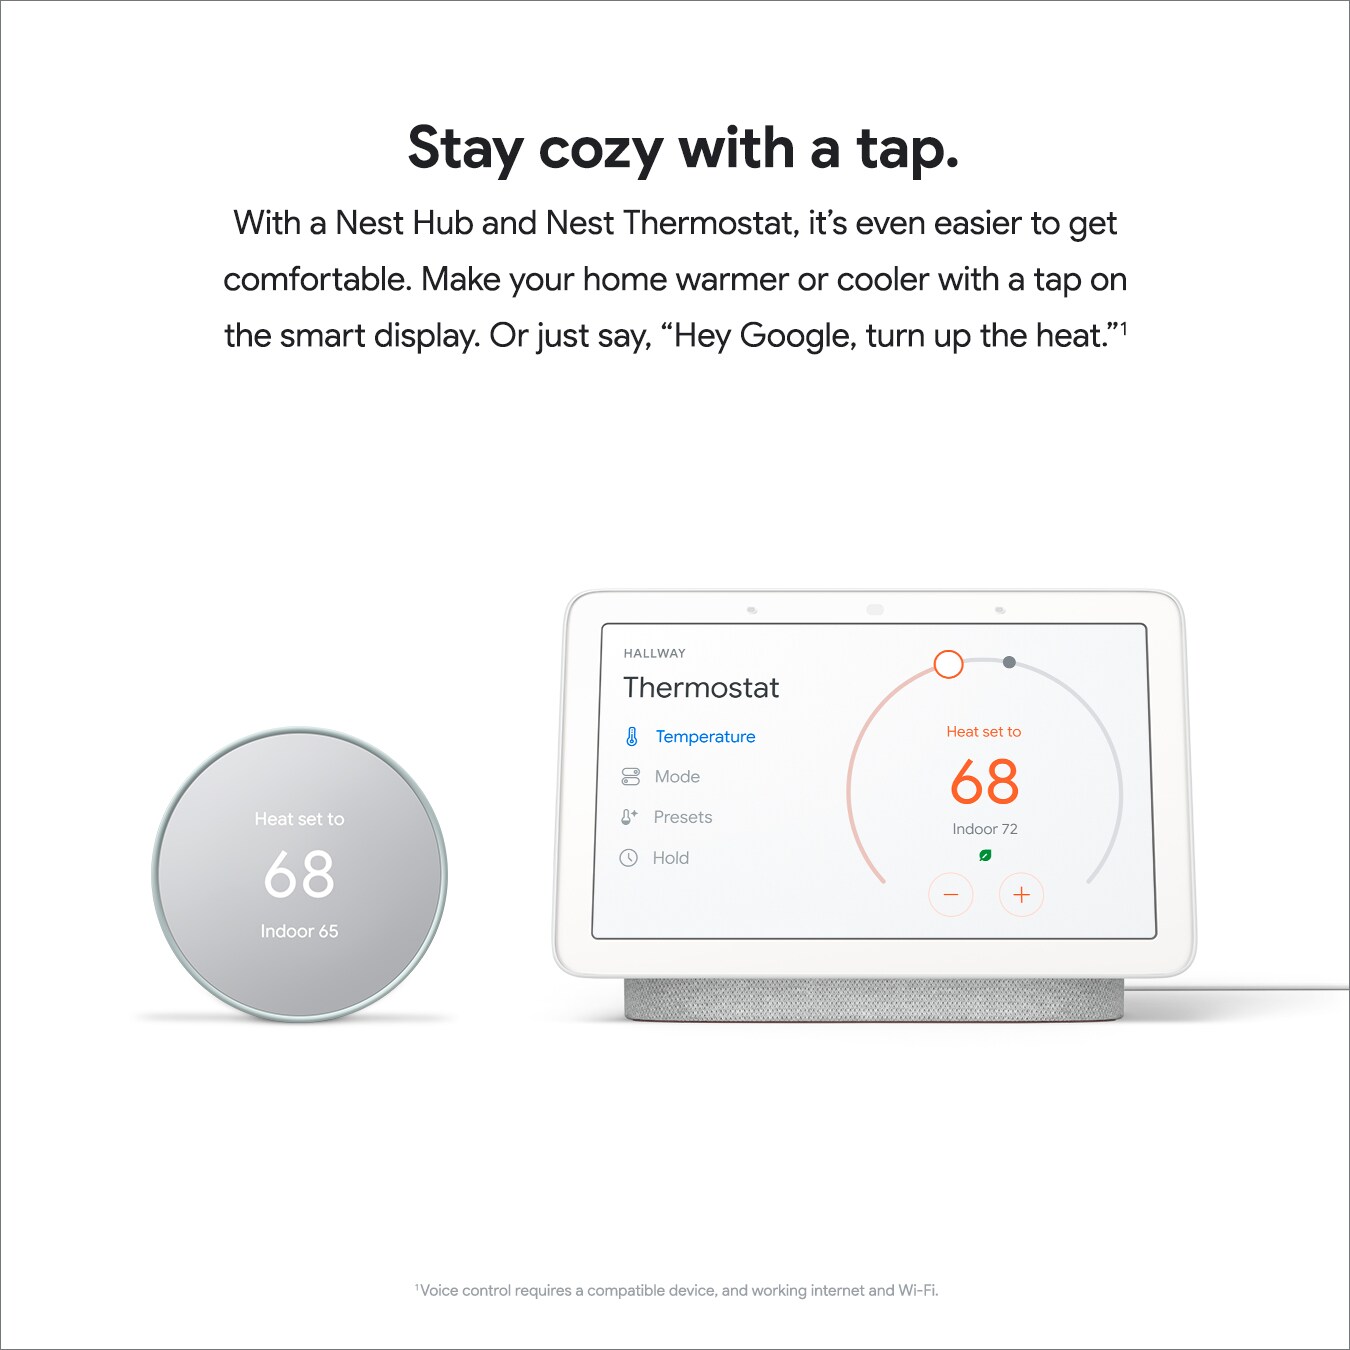 LATEST Google Nest Programmable Smart Wi-Fi Thermostat for Home GA02083-US Fog 